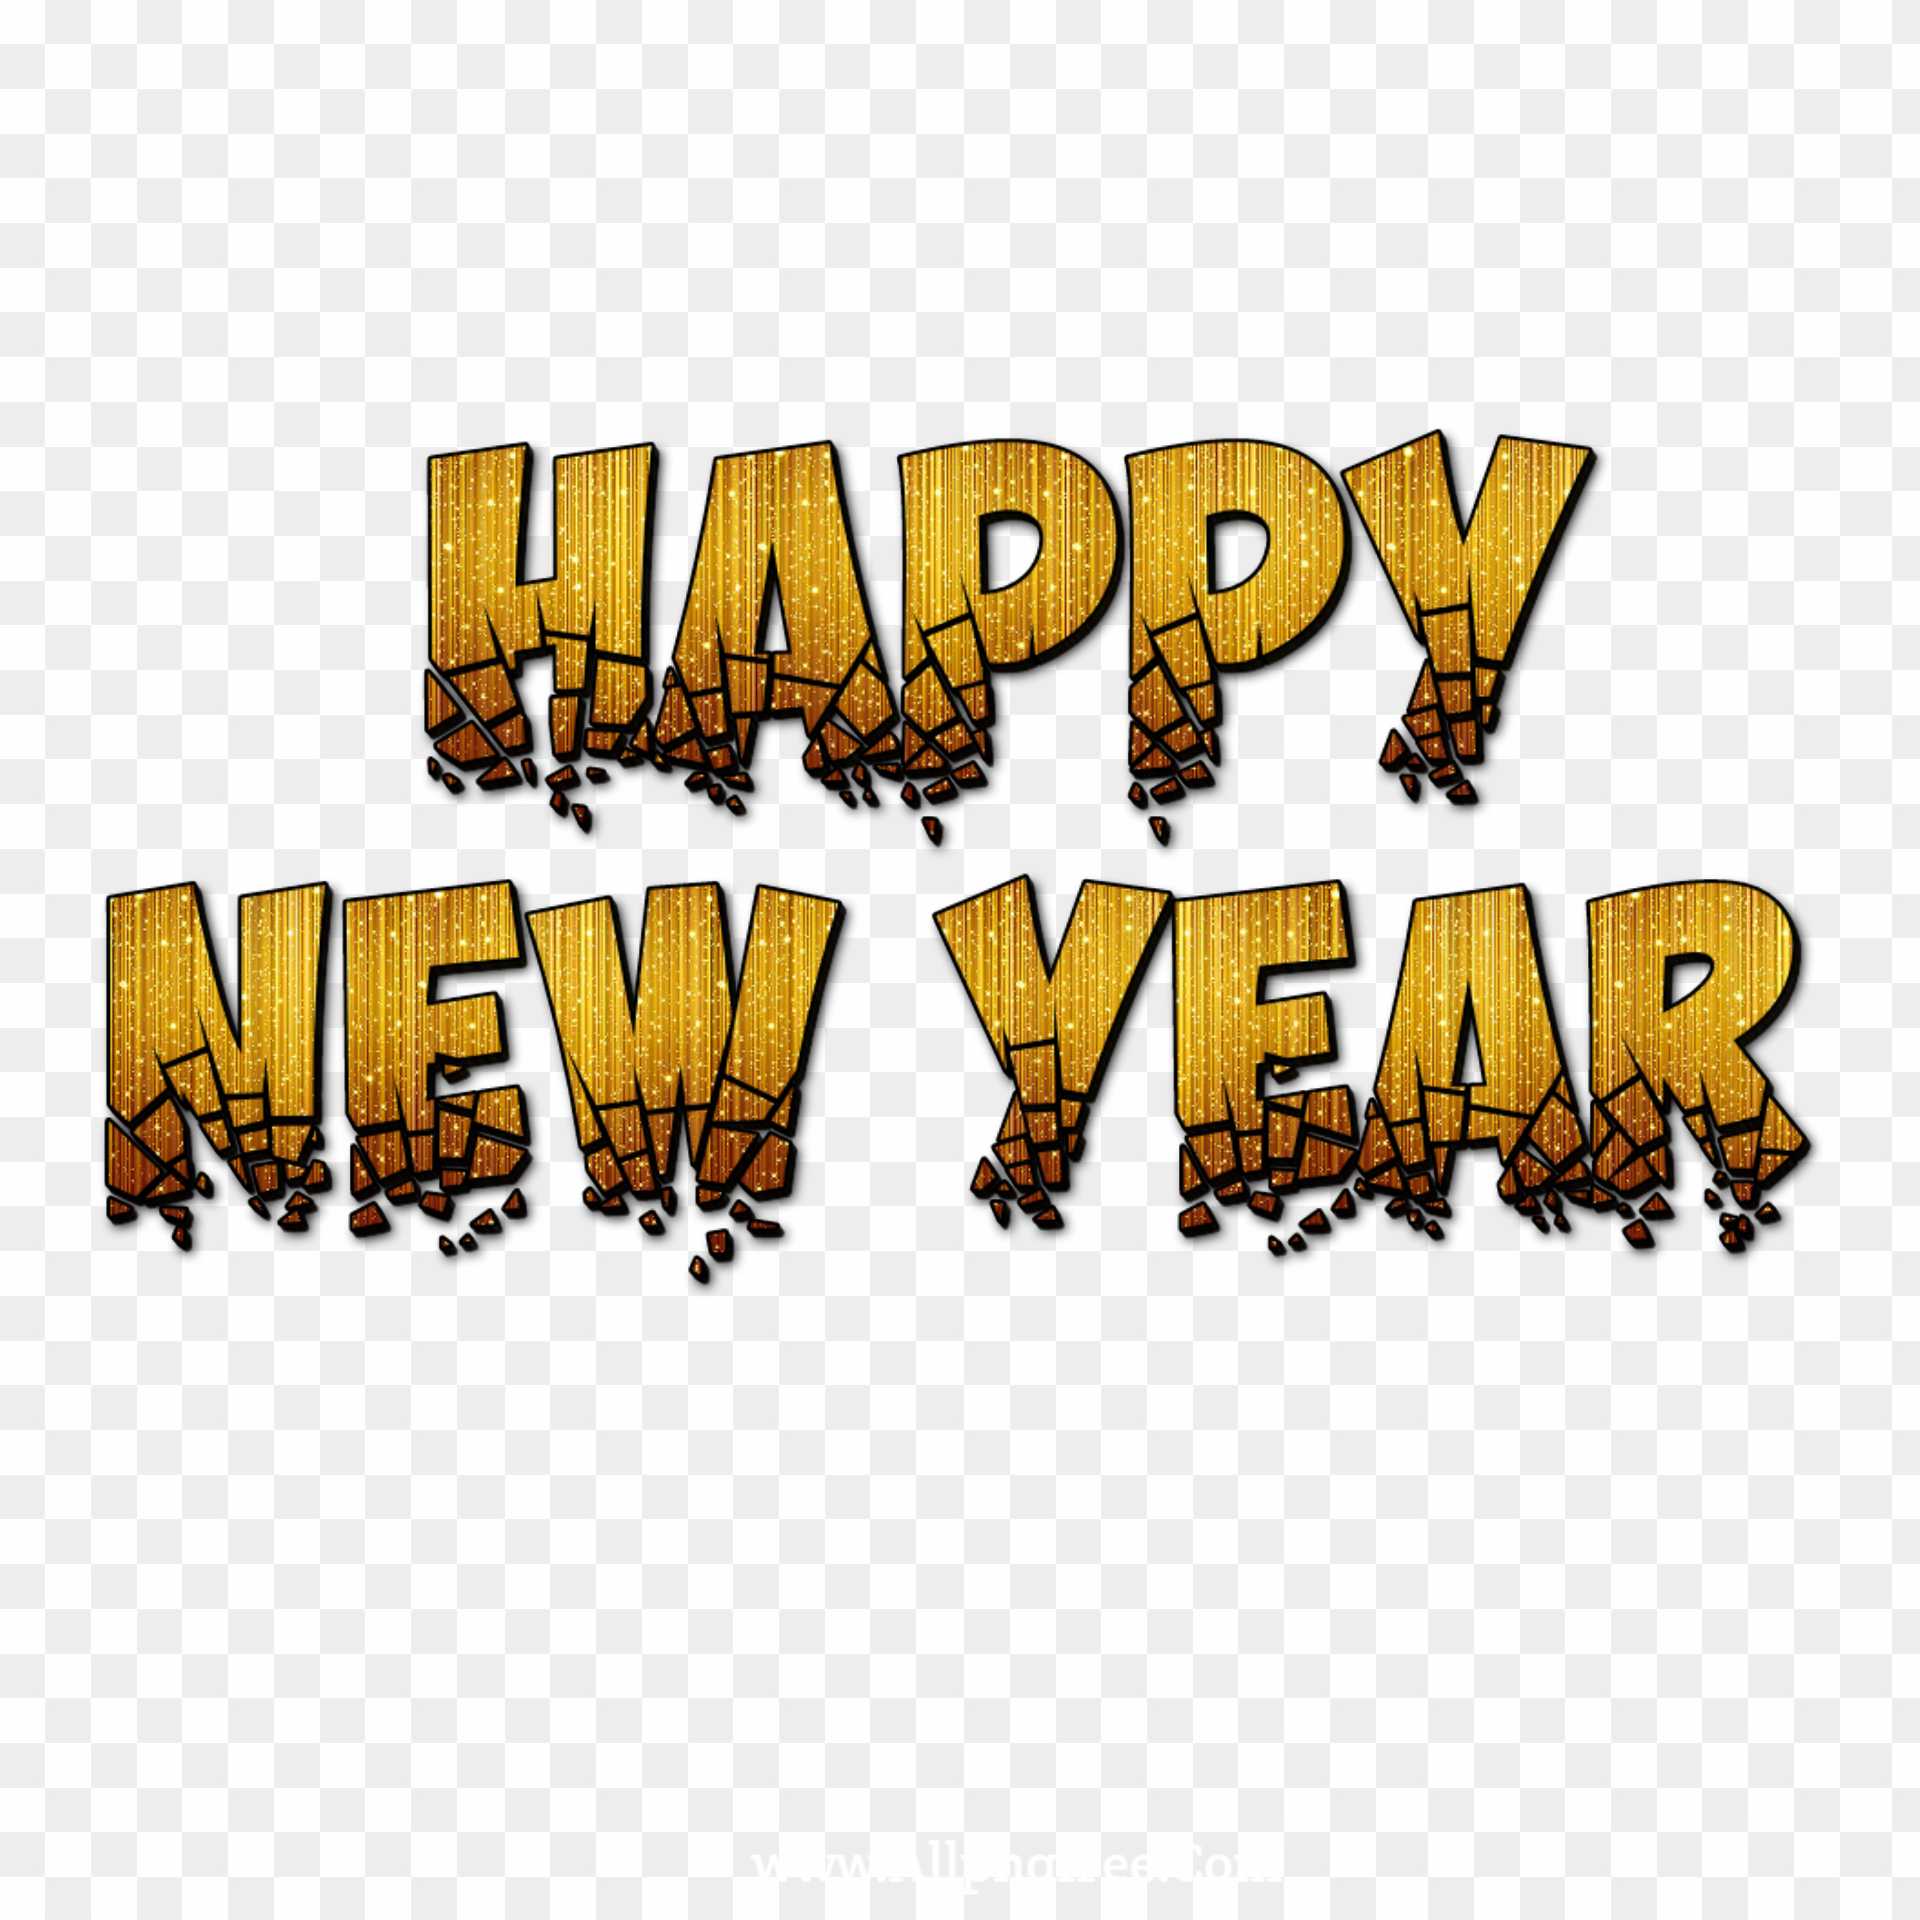 Golden Happy New year png images download 